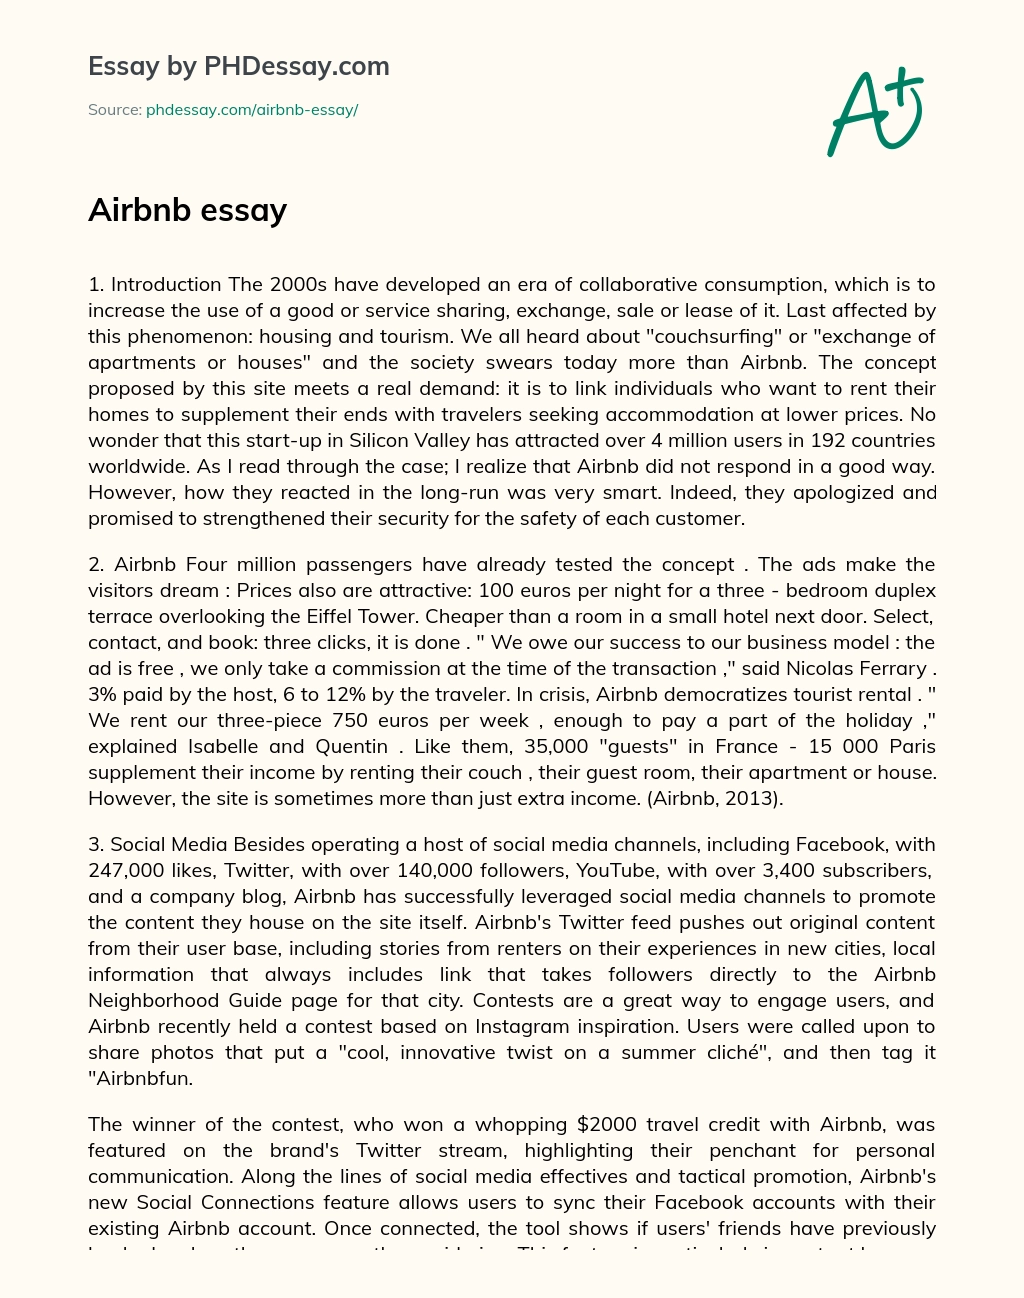 Airbnb: A Successful Example of Collaborative Consumption with a Rocky Start essay